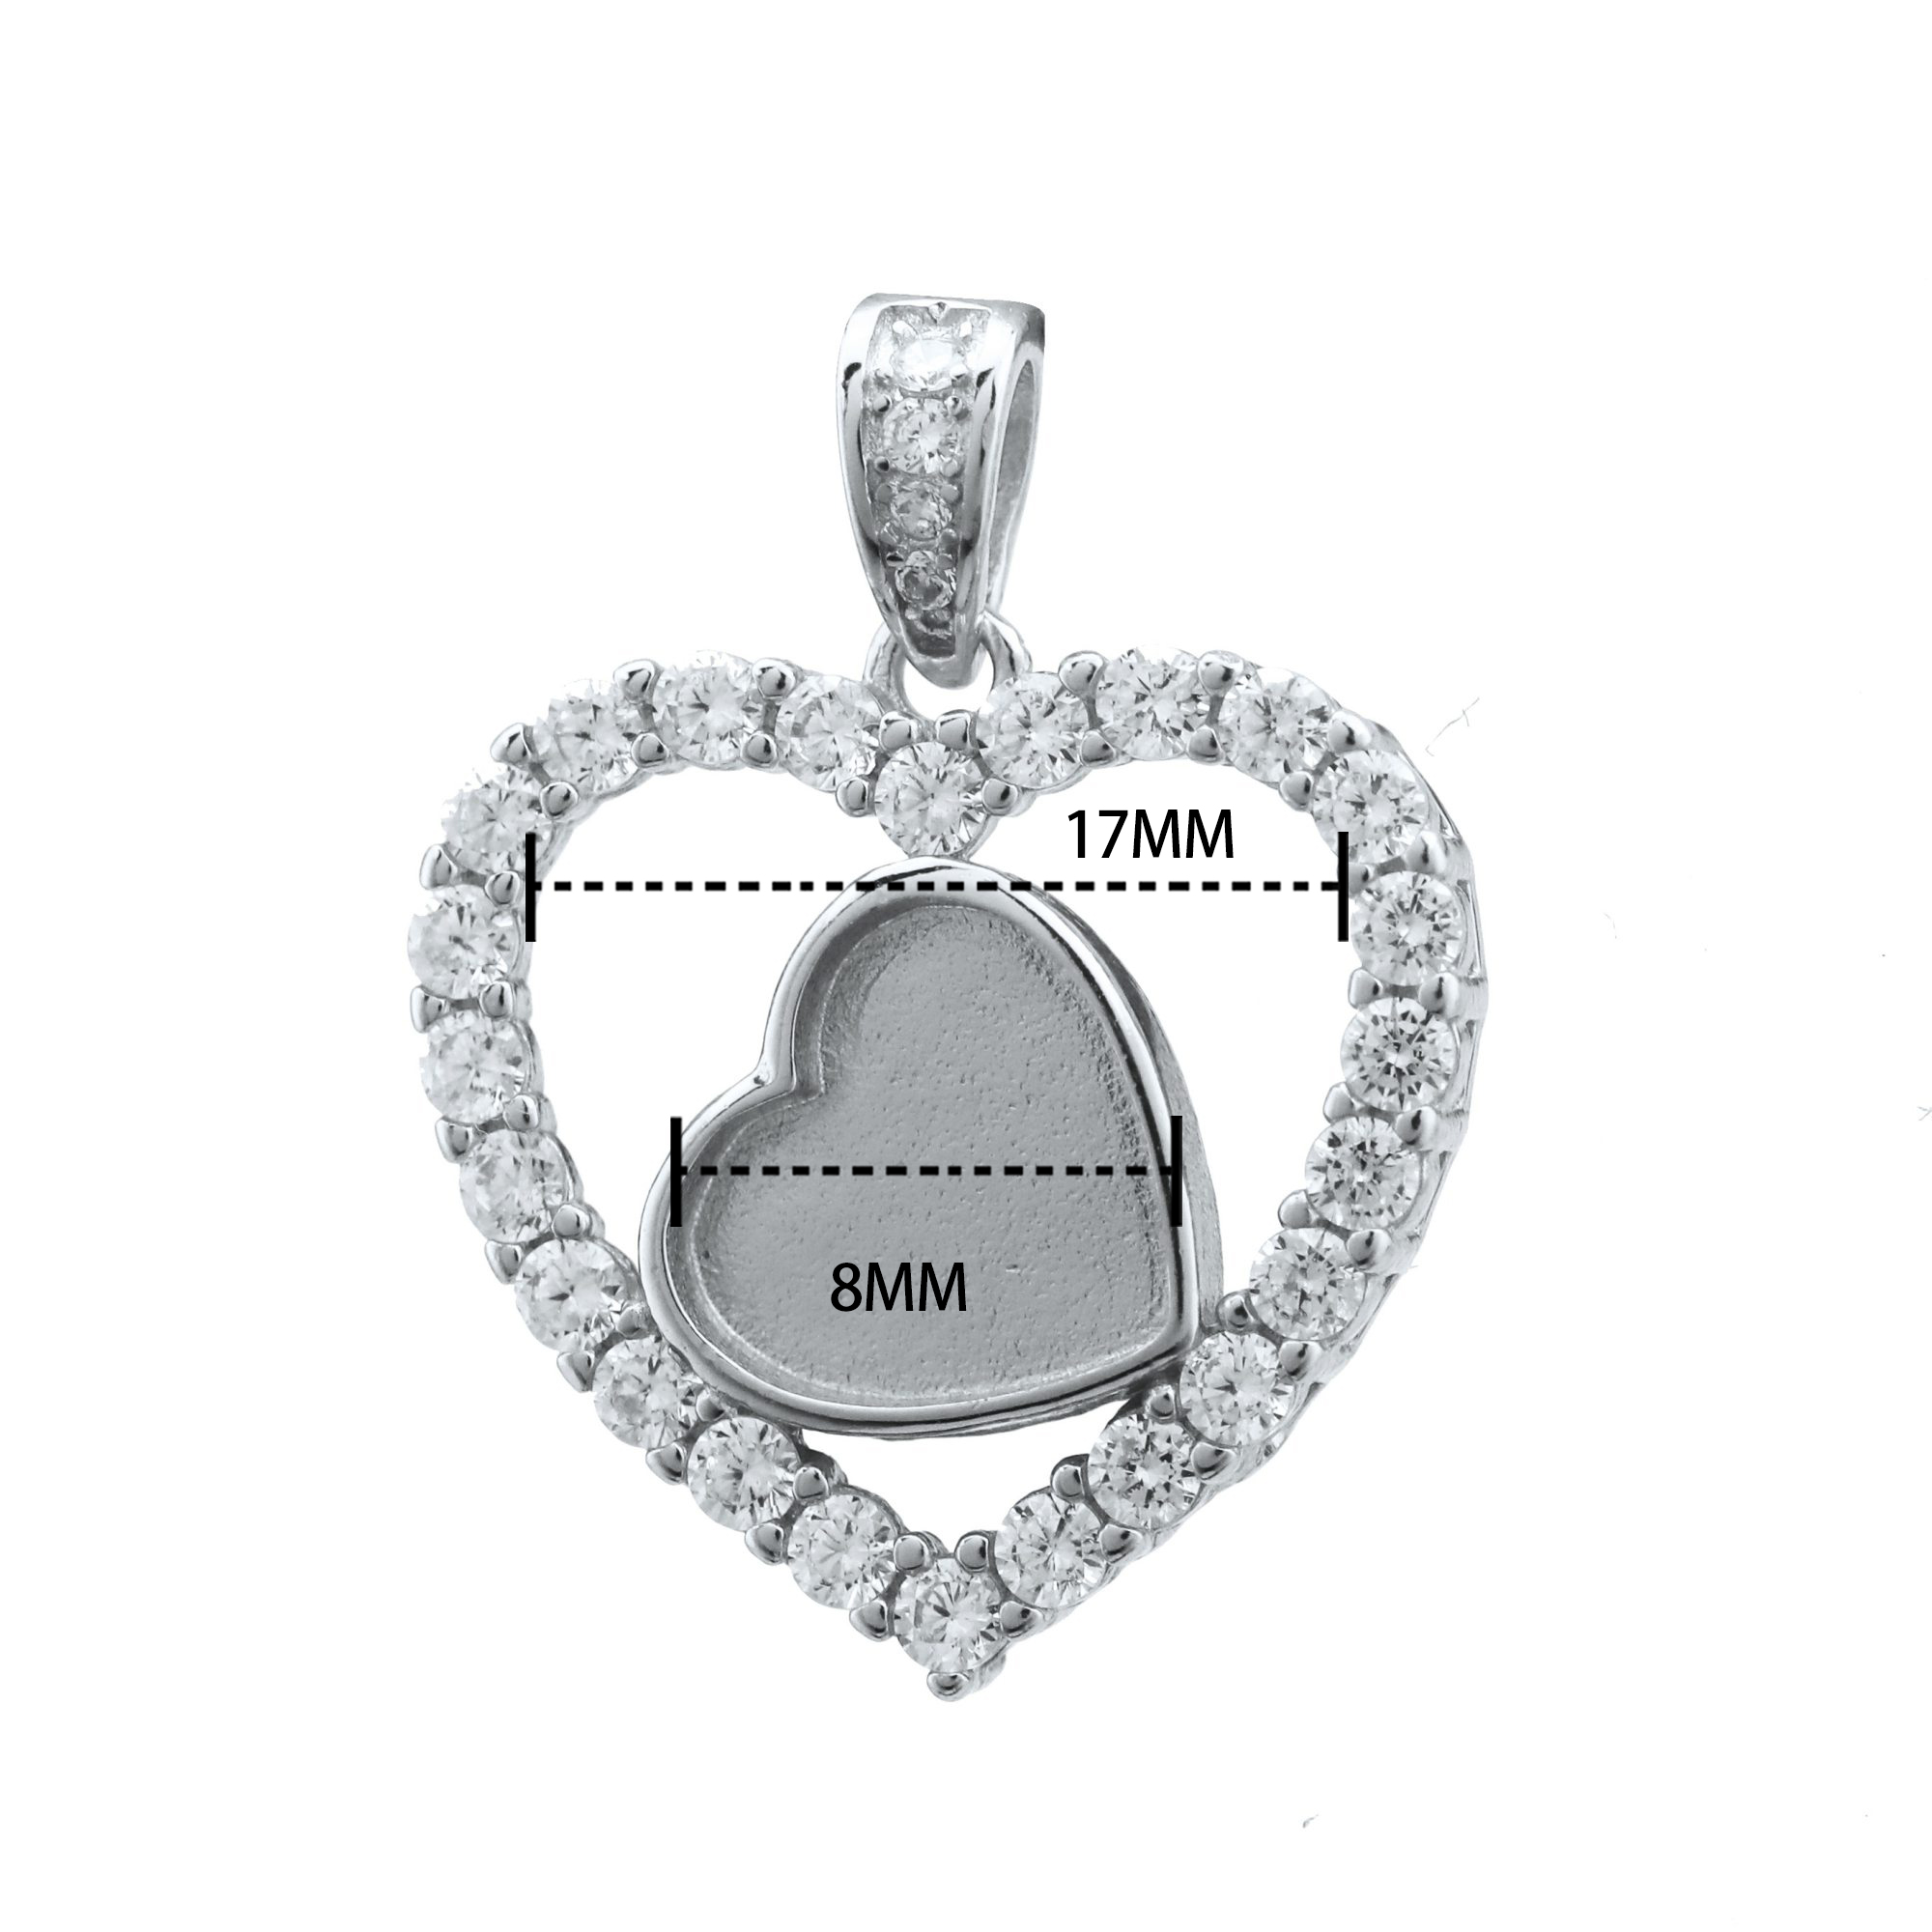 8MM Keepsake Breast Milk Resin Heart Halo Pendant Prong Settings Mother Baby Solid 925 Sterling Silver Rose Gold Plated Charm Bezel 1431132 - Click Image to Close